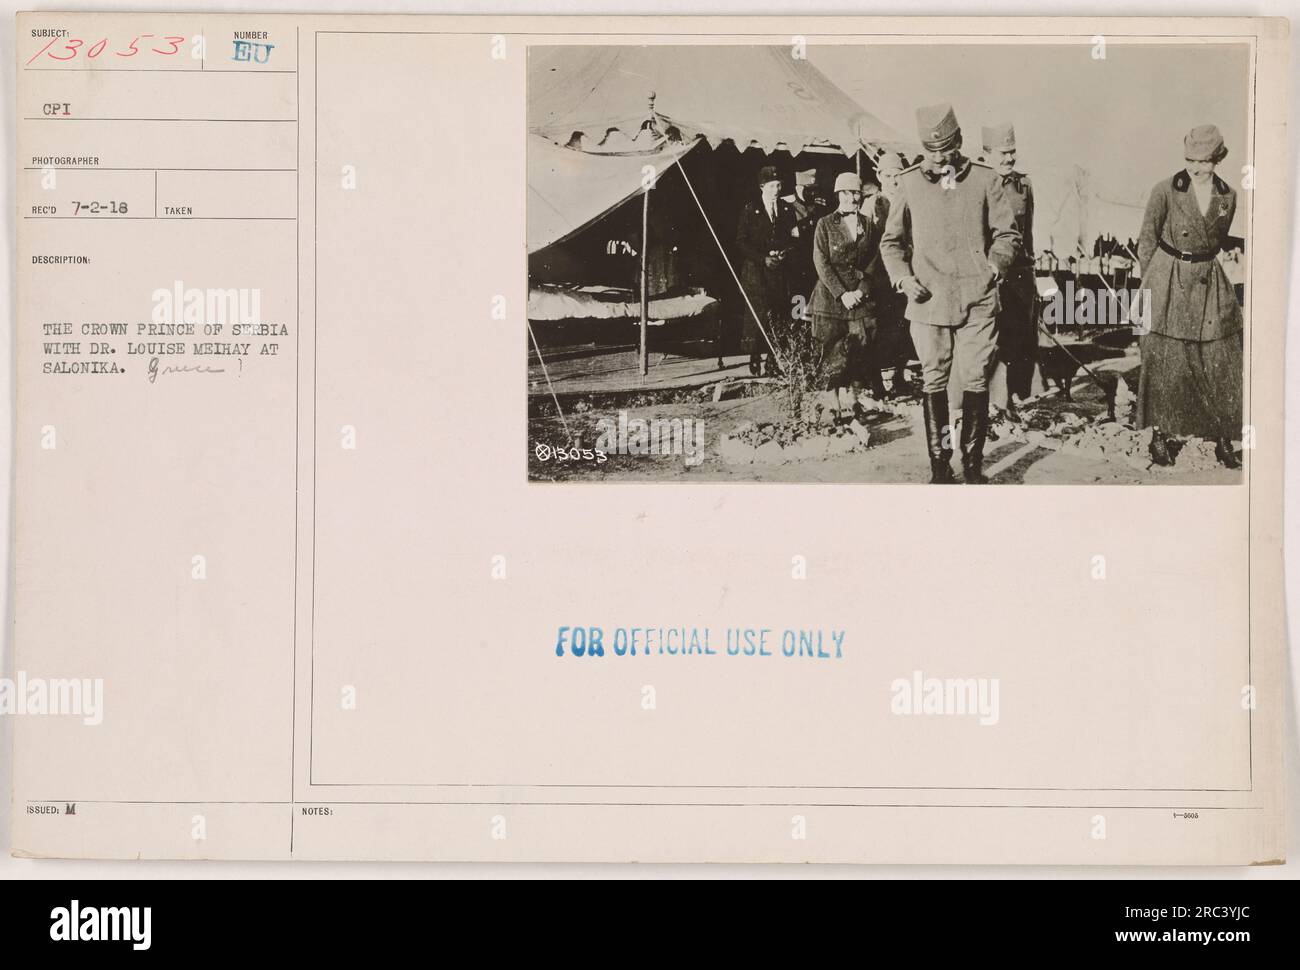 Crown Prince of Serbia with Dr. Louise Meihay in Salonika, Greece during World War One. (Note: Image taken by photographer Reco on July 2, 1918. Description number EU 013053. For official use only.) Stock Photo